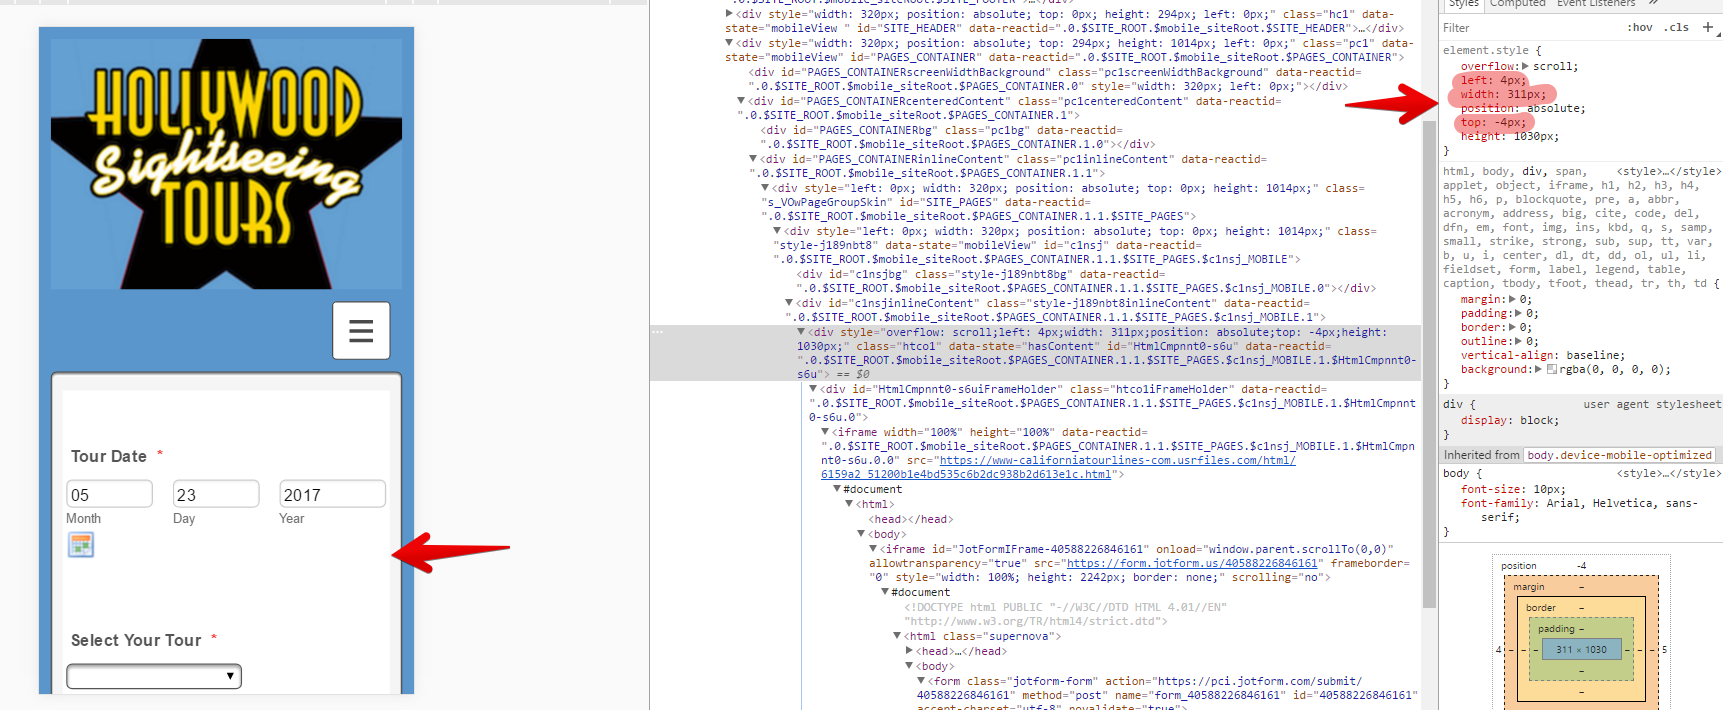 Form is not responsive on my Wix site Image 2 Screenshot 41